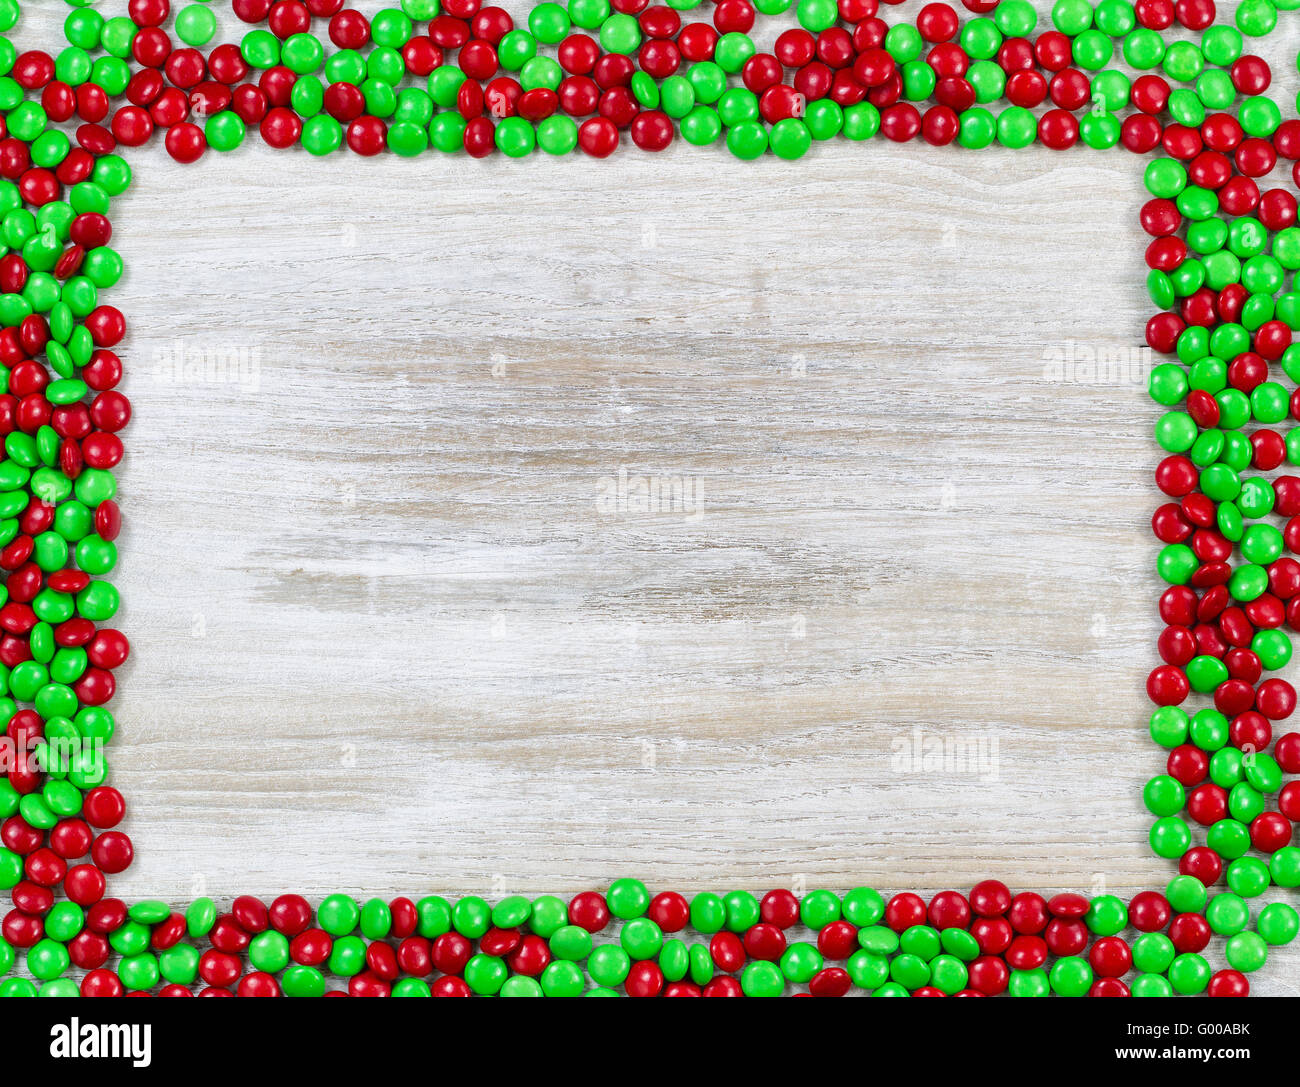 Red and Green candy border on wood Stock Photo